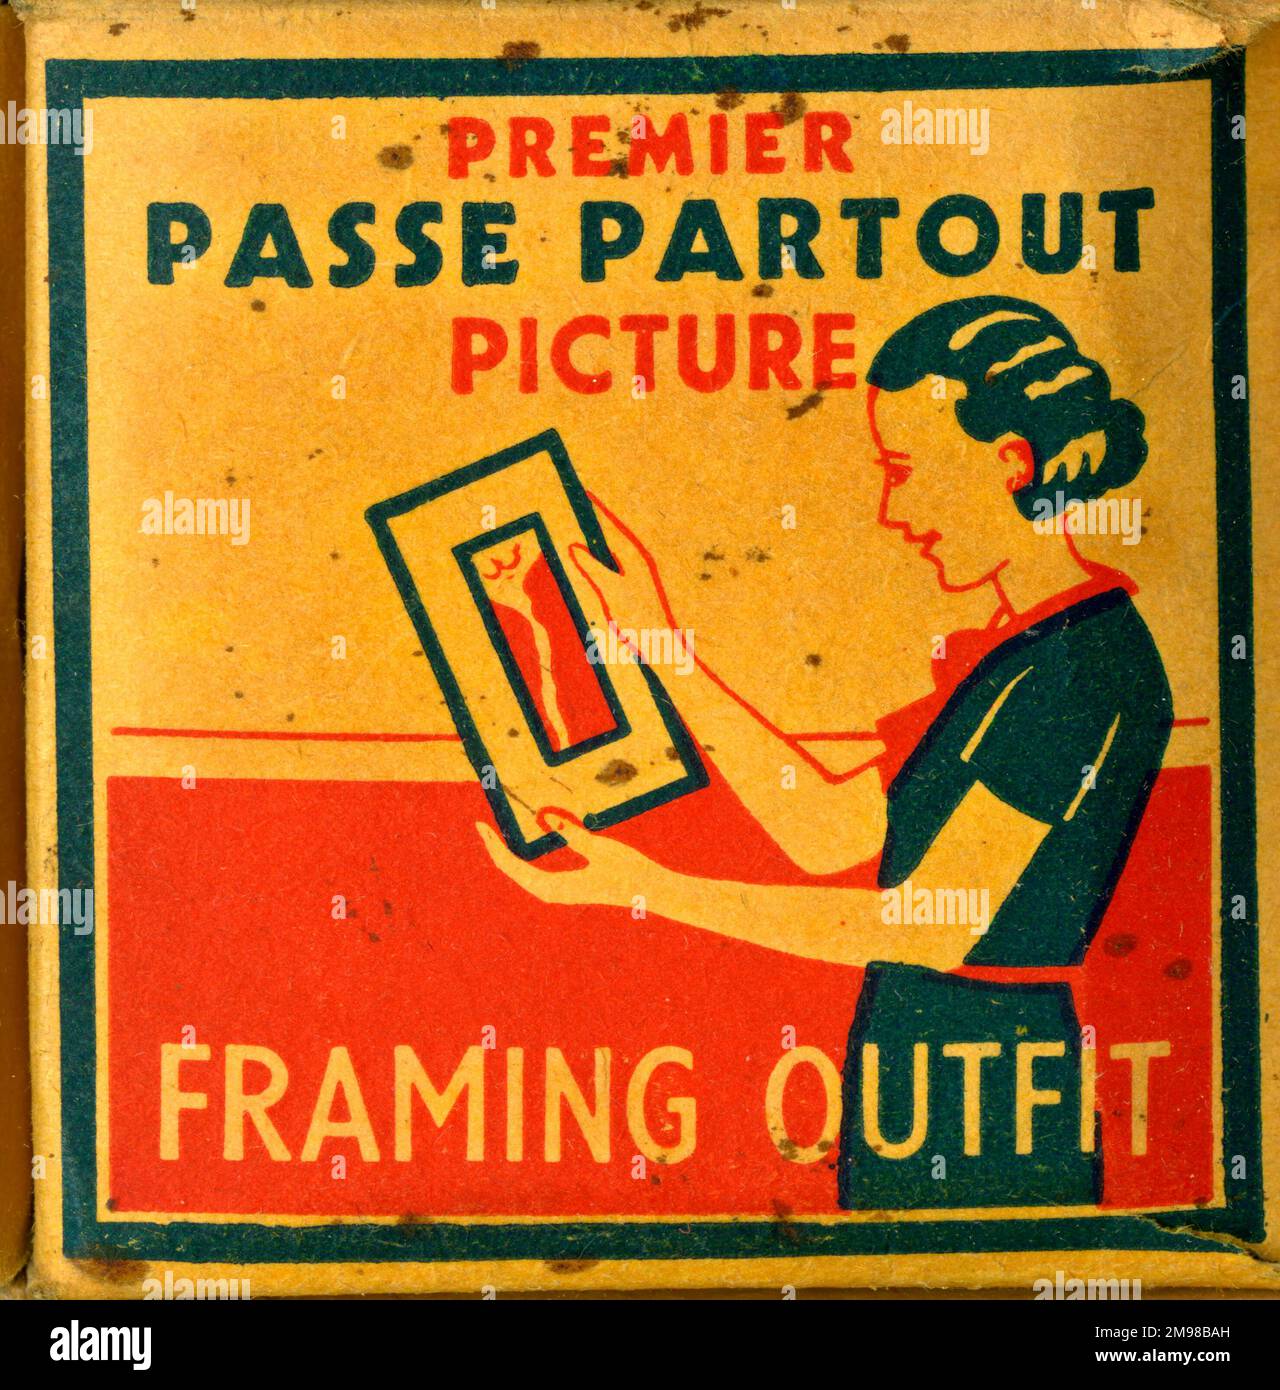 Box cover design, Passe Partout Picture Framing Outfit. Stock Photo